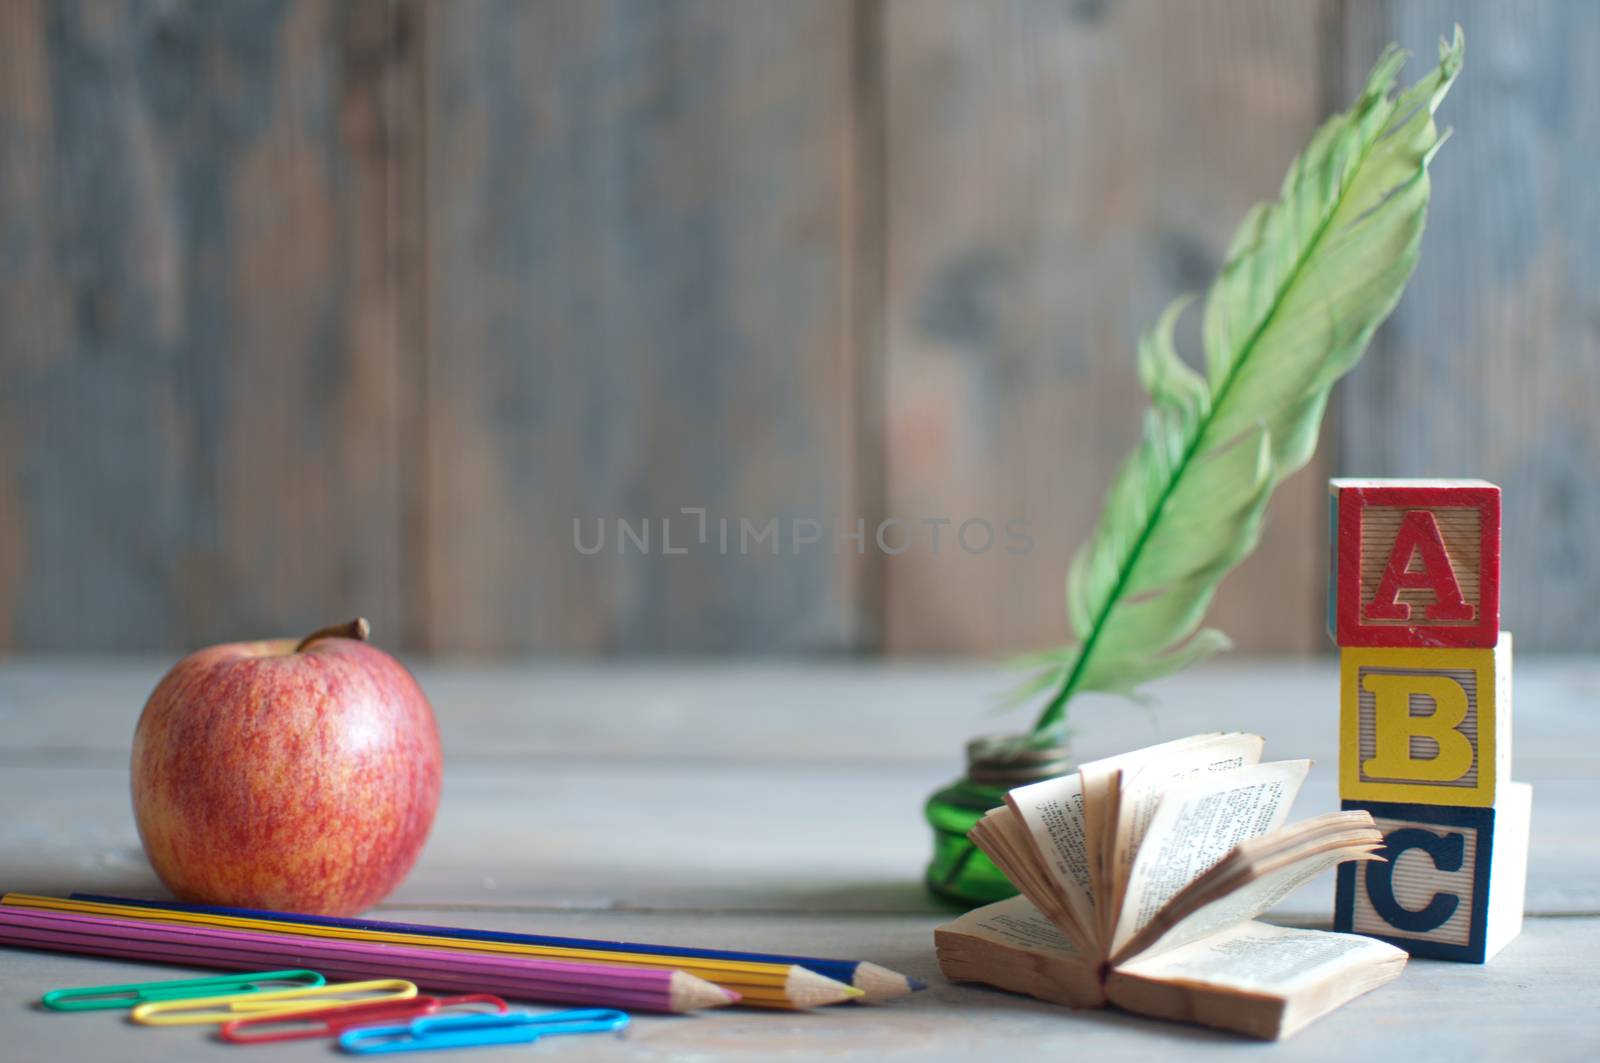 Stationery objects, miniature book and apple with background space 